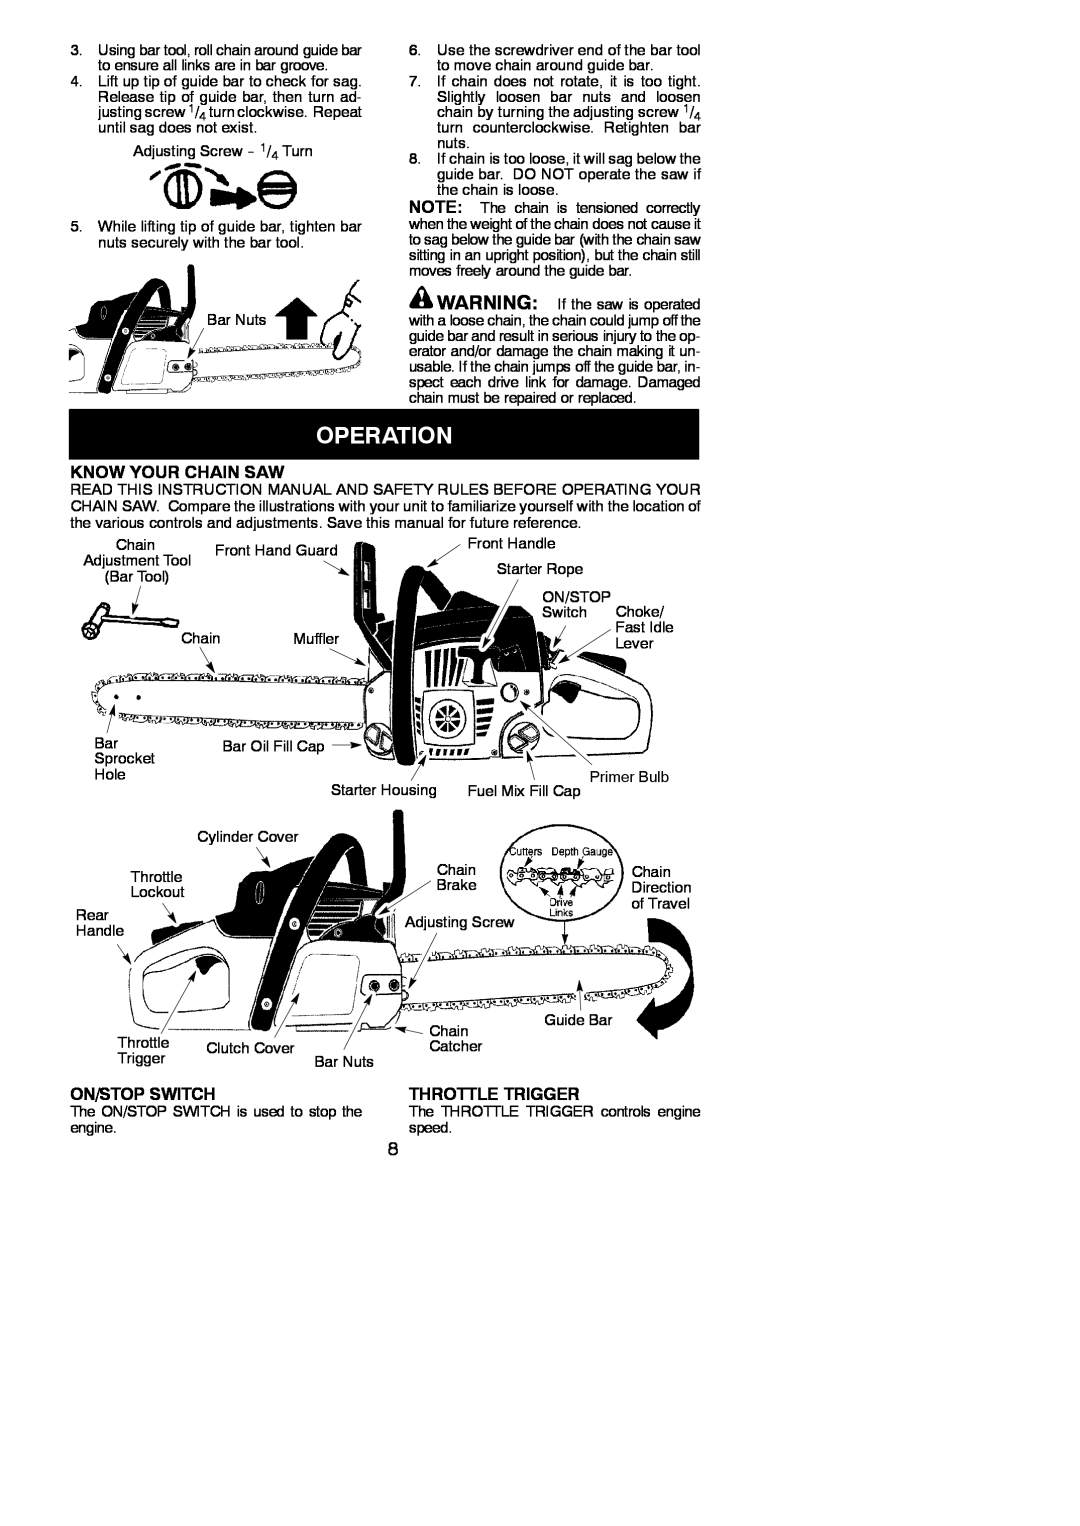 Poulan 115153026, P3818, 966050501 instruction manual Operation, Know Your Chain Saw, On/Stop Switch, Throttle Trigger 